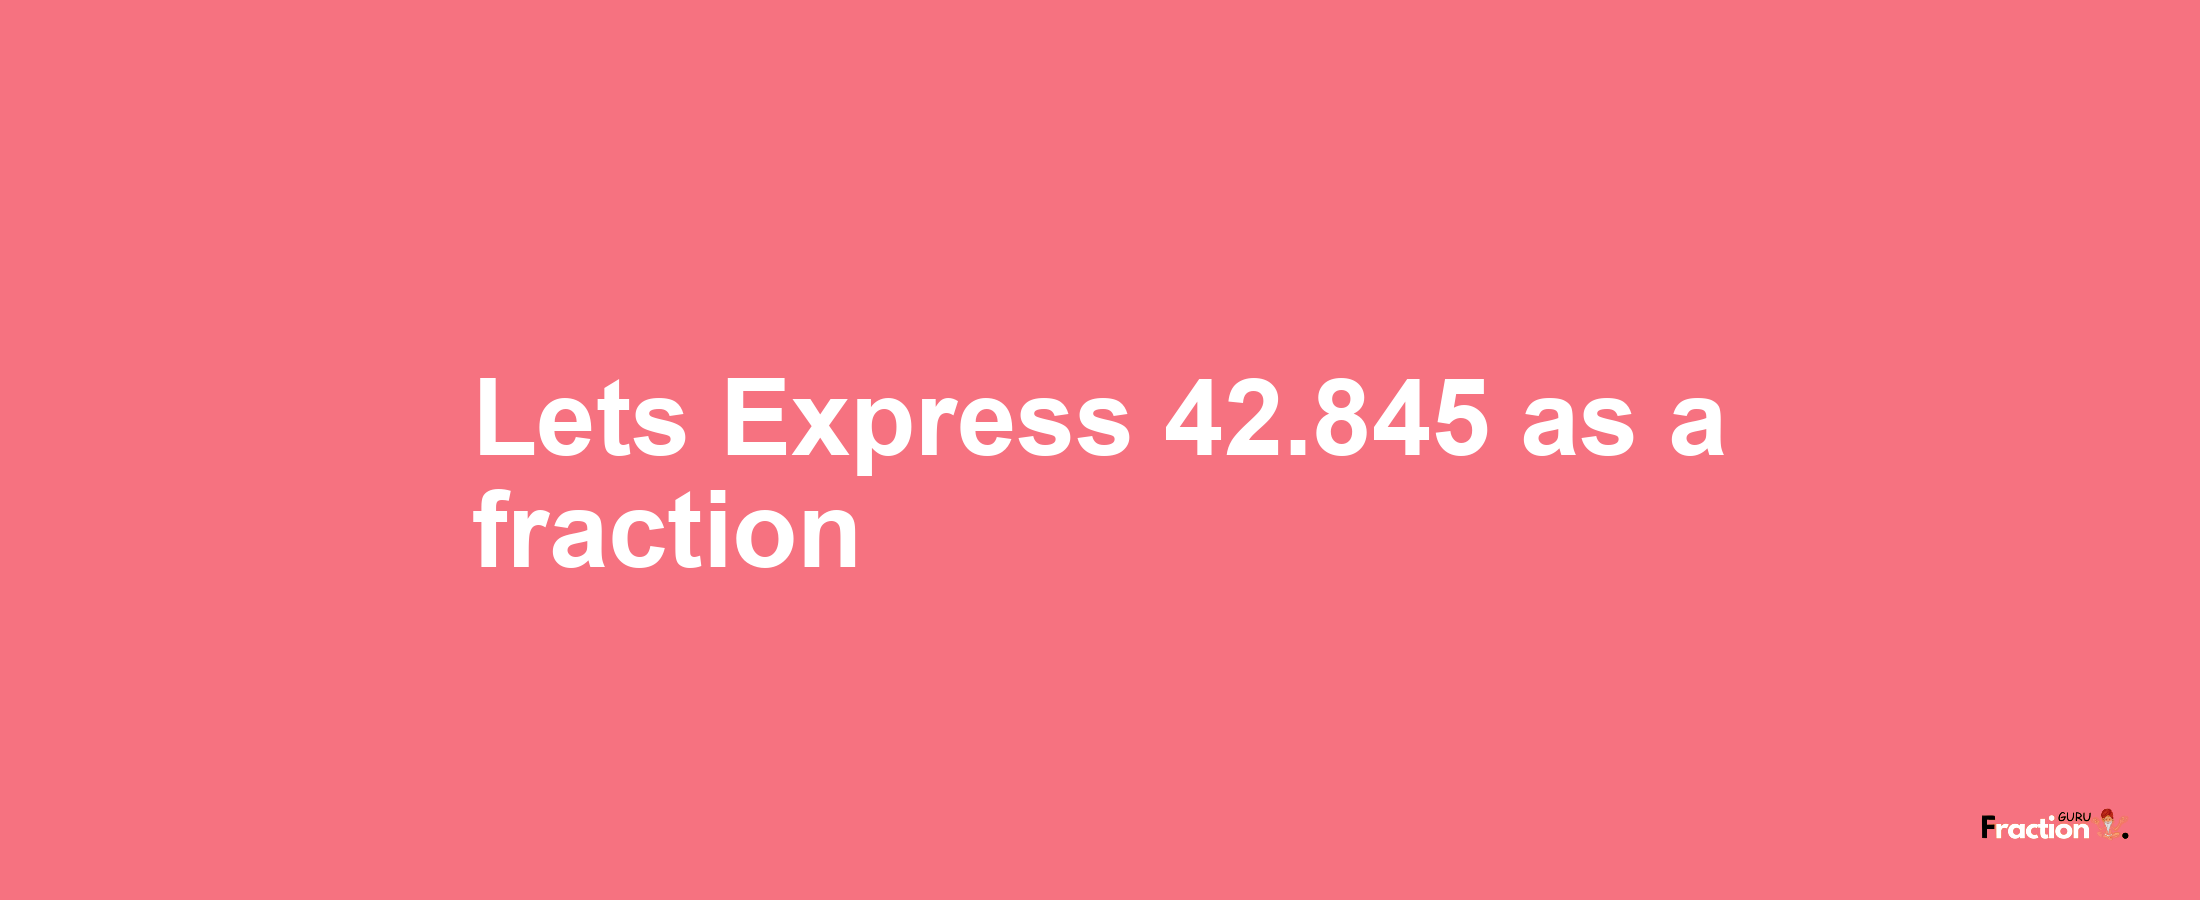 Lets Express 42.845 as afraction